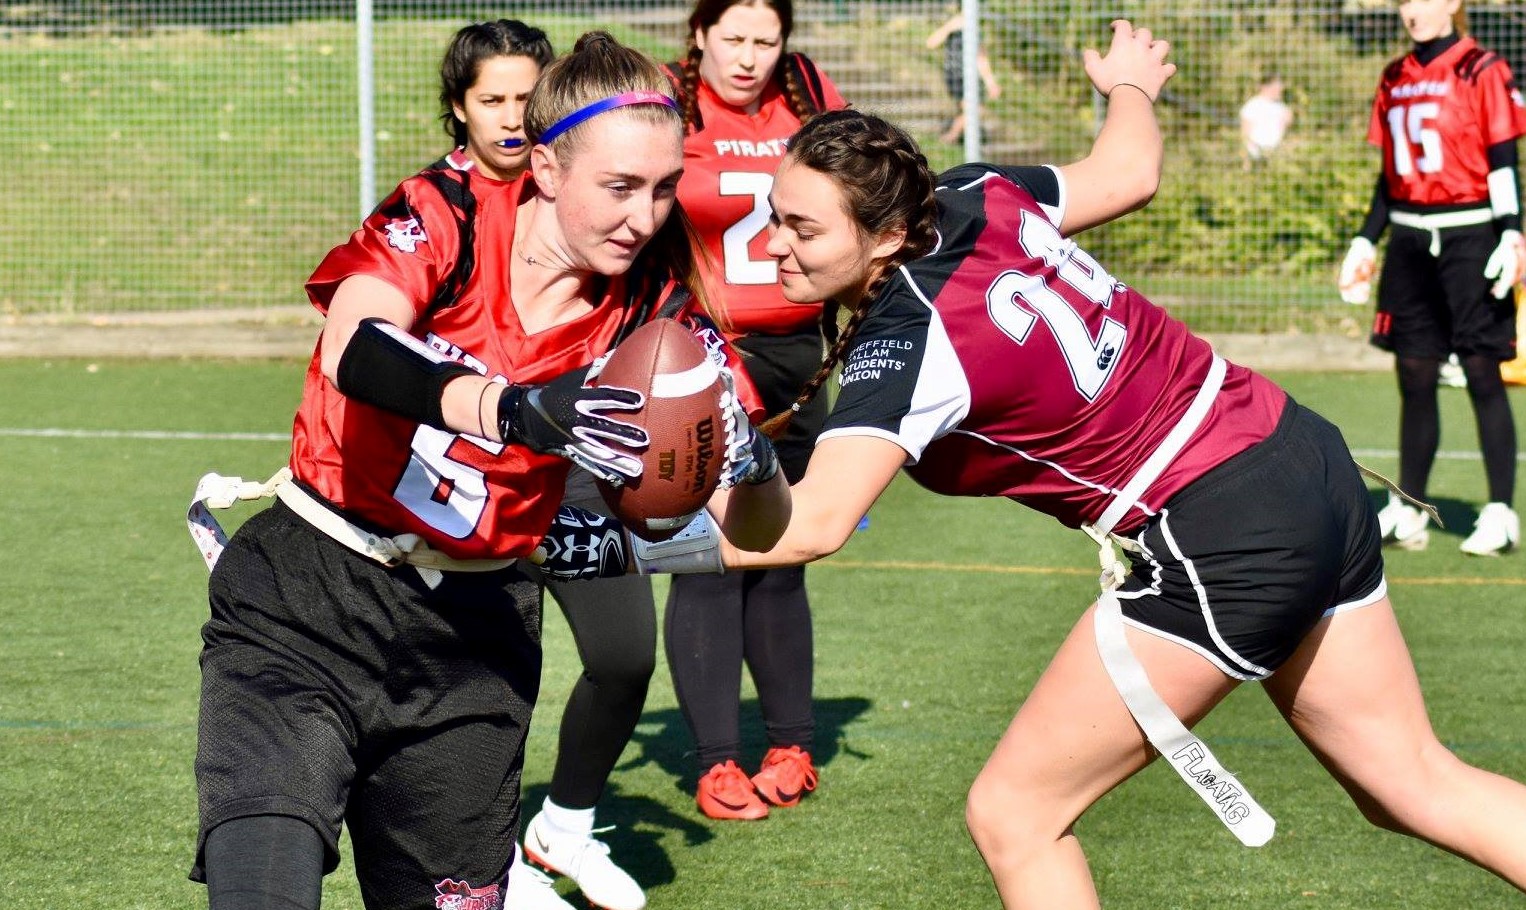 Schecter backs calls to ‘break down barriers’ for girls and women in sport